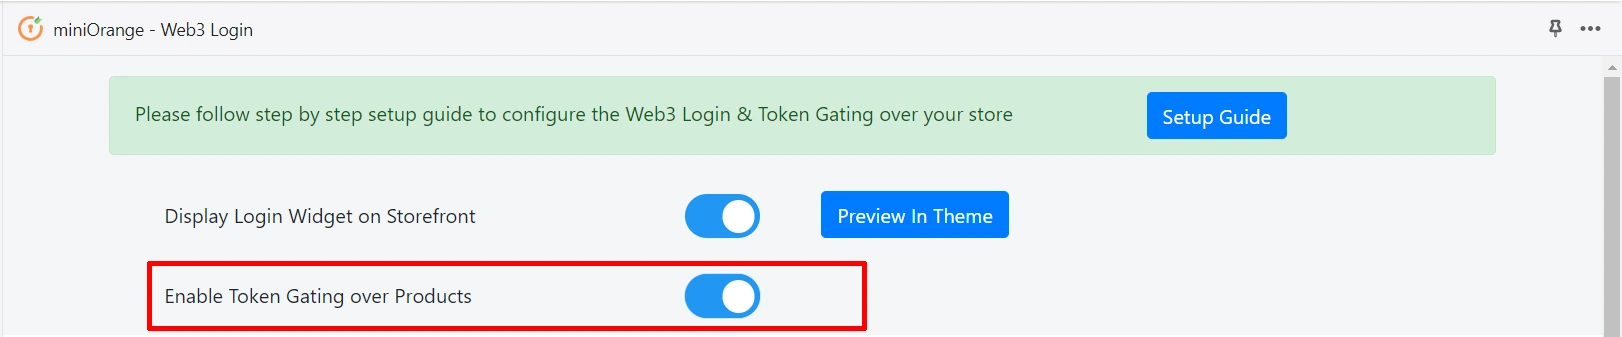 shopify content restriction application - enable token gating in dashboard